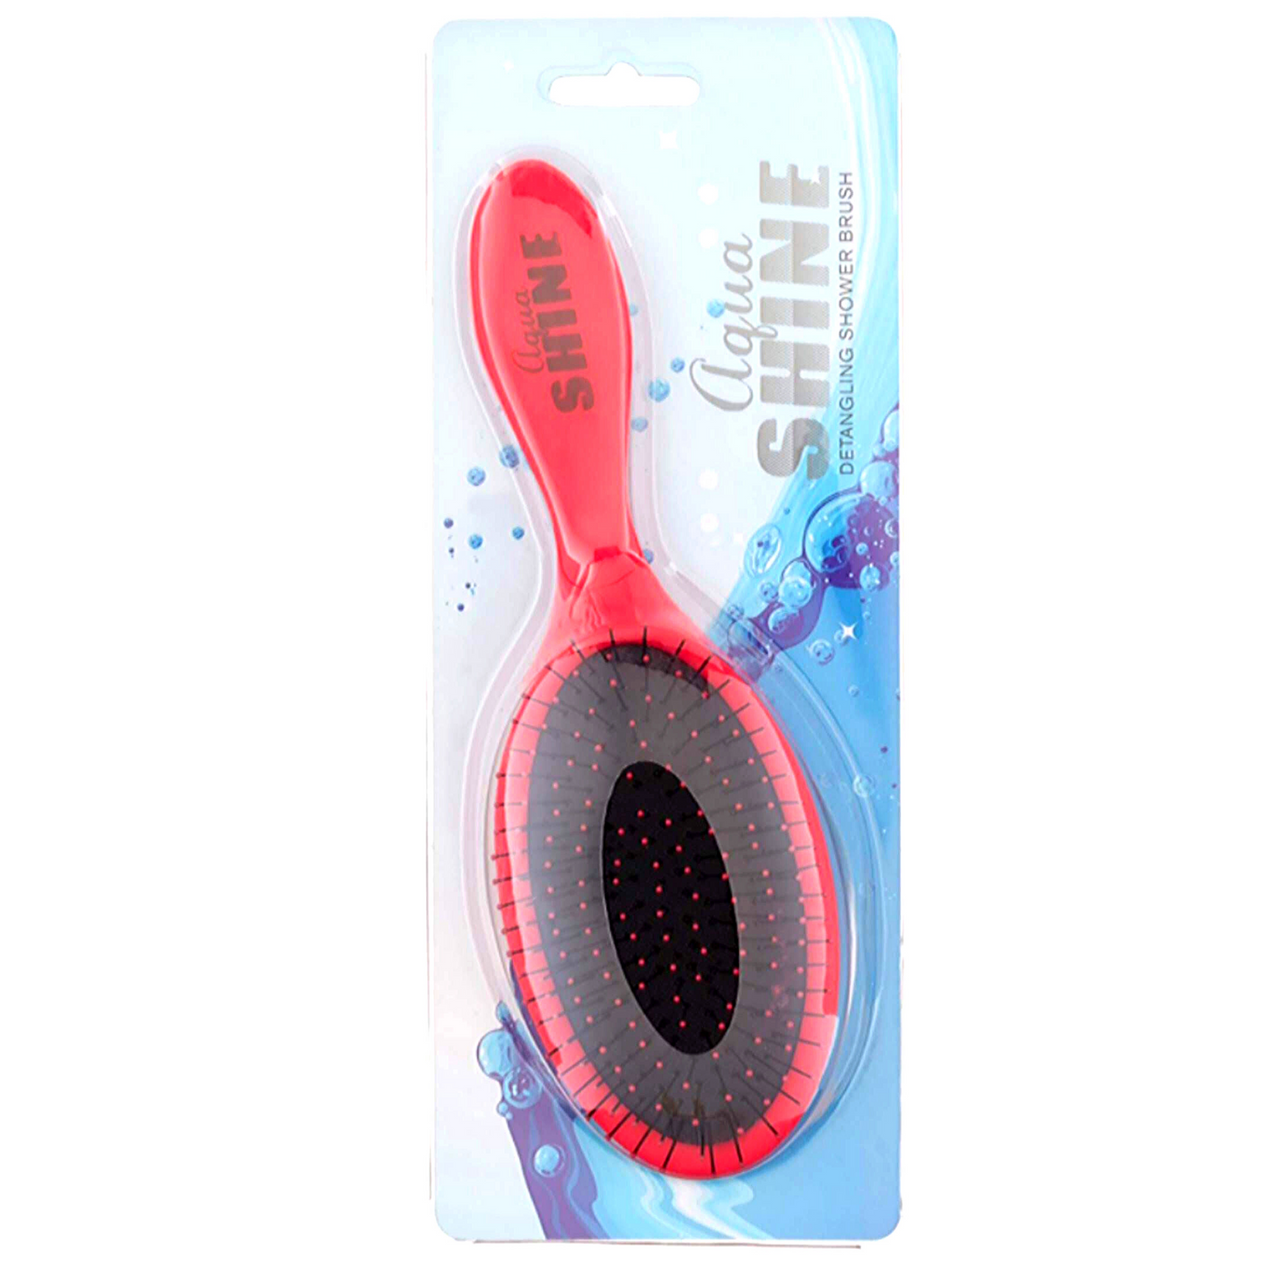 Wet Dry Brush Soft Flexible Bristles Detangles and Smooths with Ease - Pink